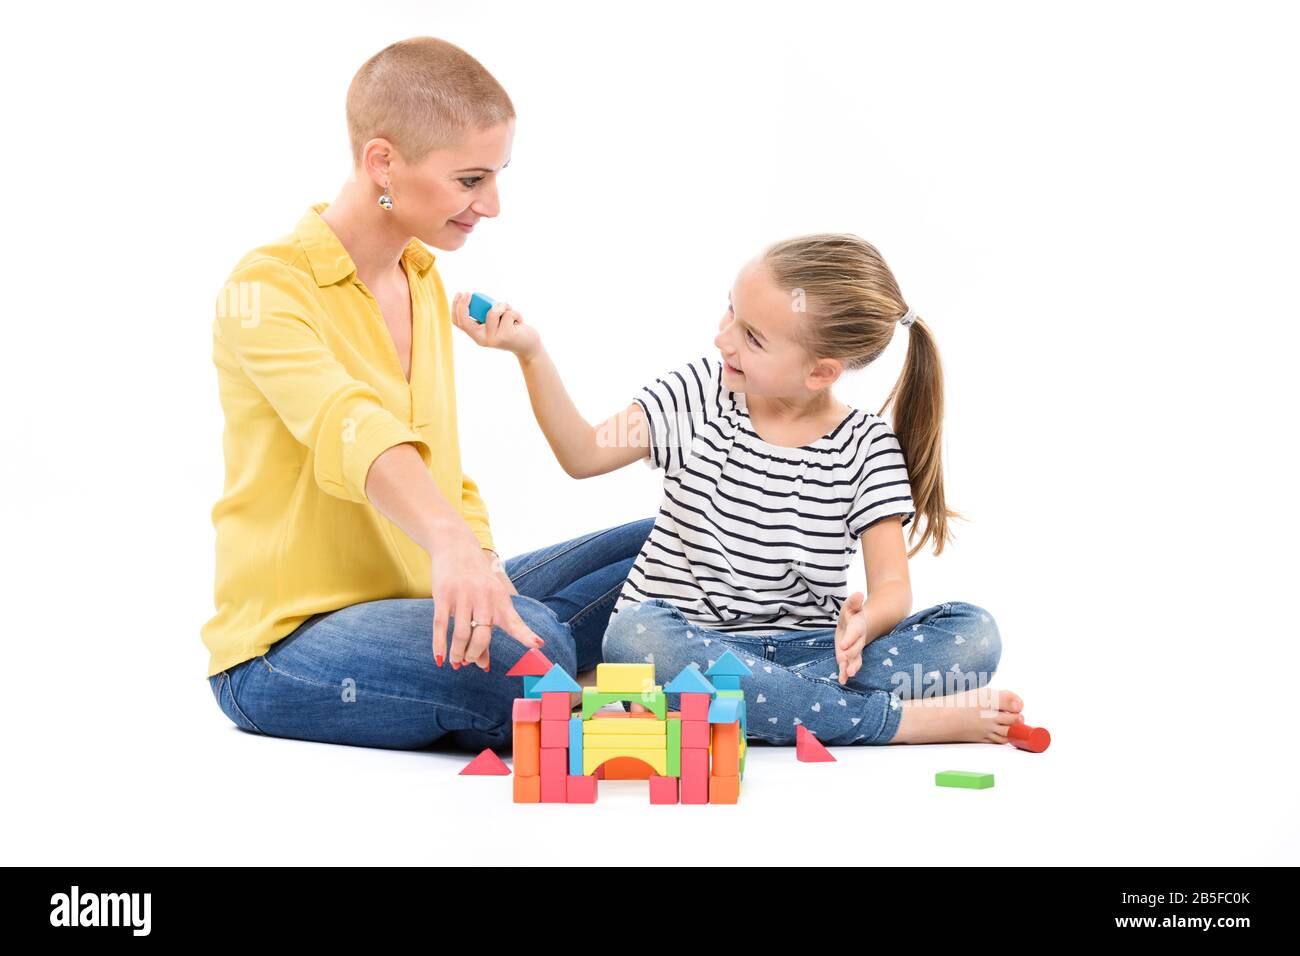 Young girl in child occupational therapy session doing sensory playful exercises with her therapist. Child therapy concept on white background. Stock Photo